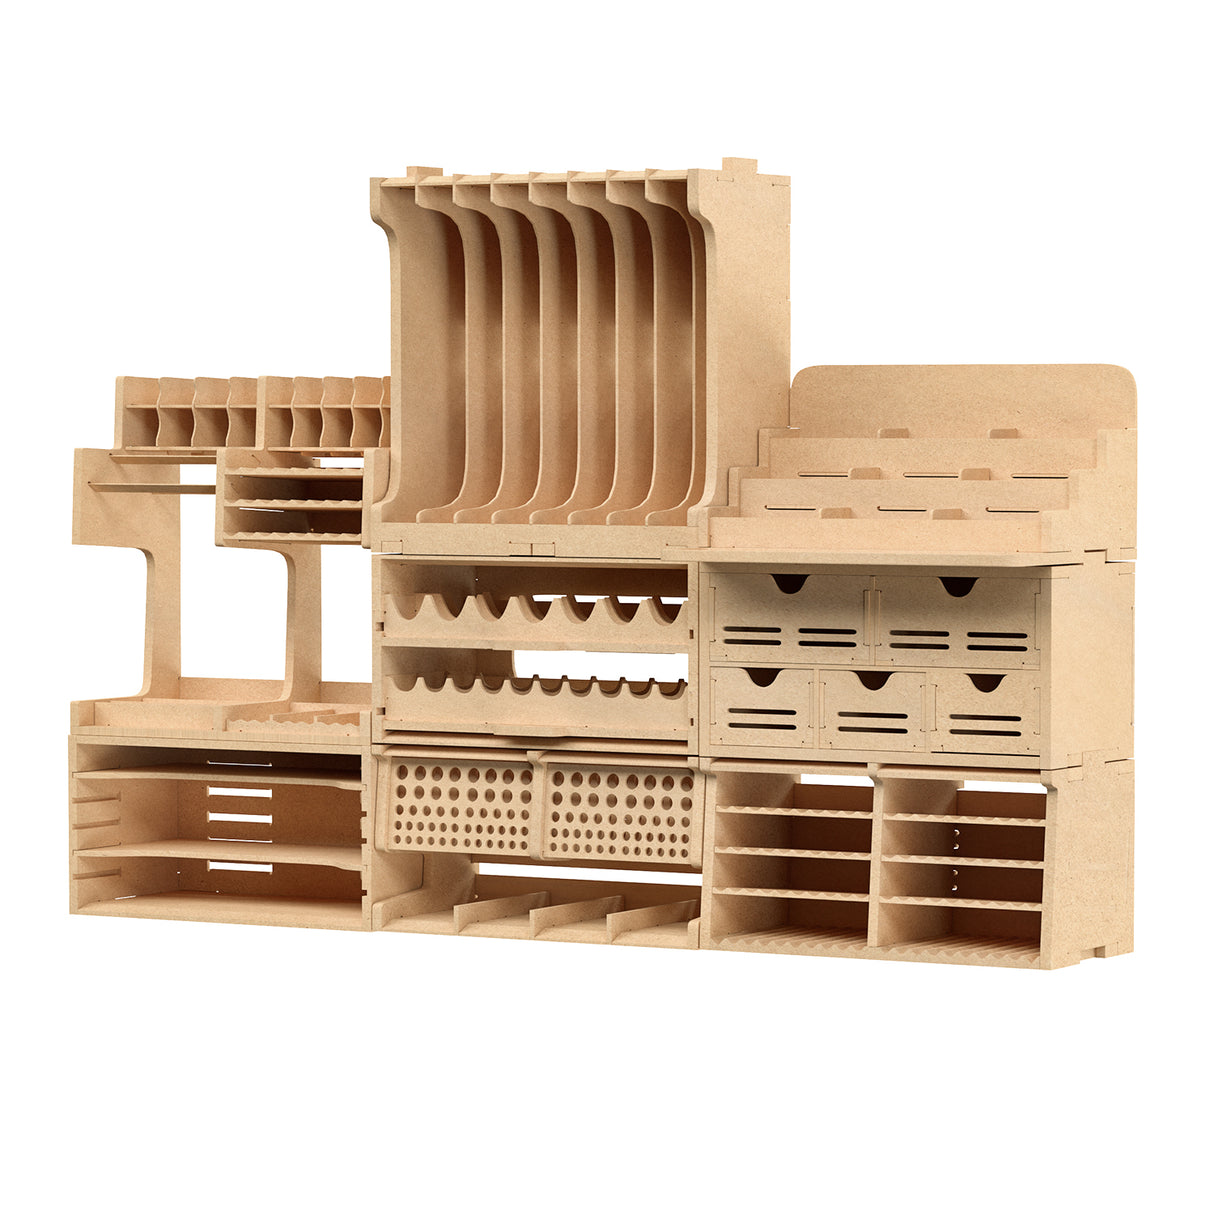 Bucasso Wooden Model Paint Organizer, Paint Rack with MDF Material for 35  Paint Bottles, Craft Paint Holder Suitable for Tamiya/Vallejo/Citadel, GK11